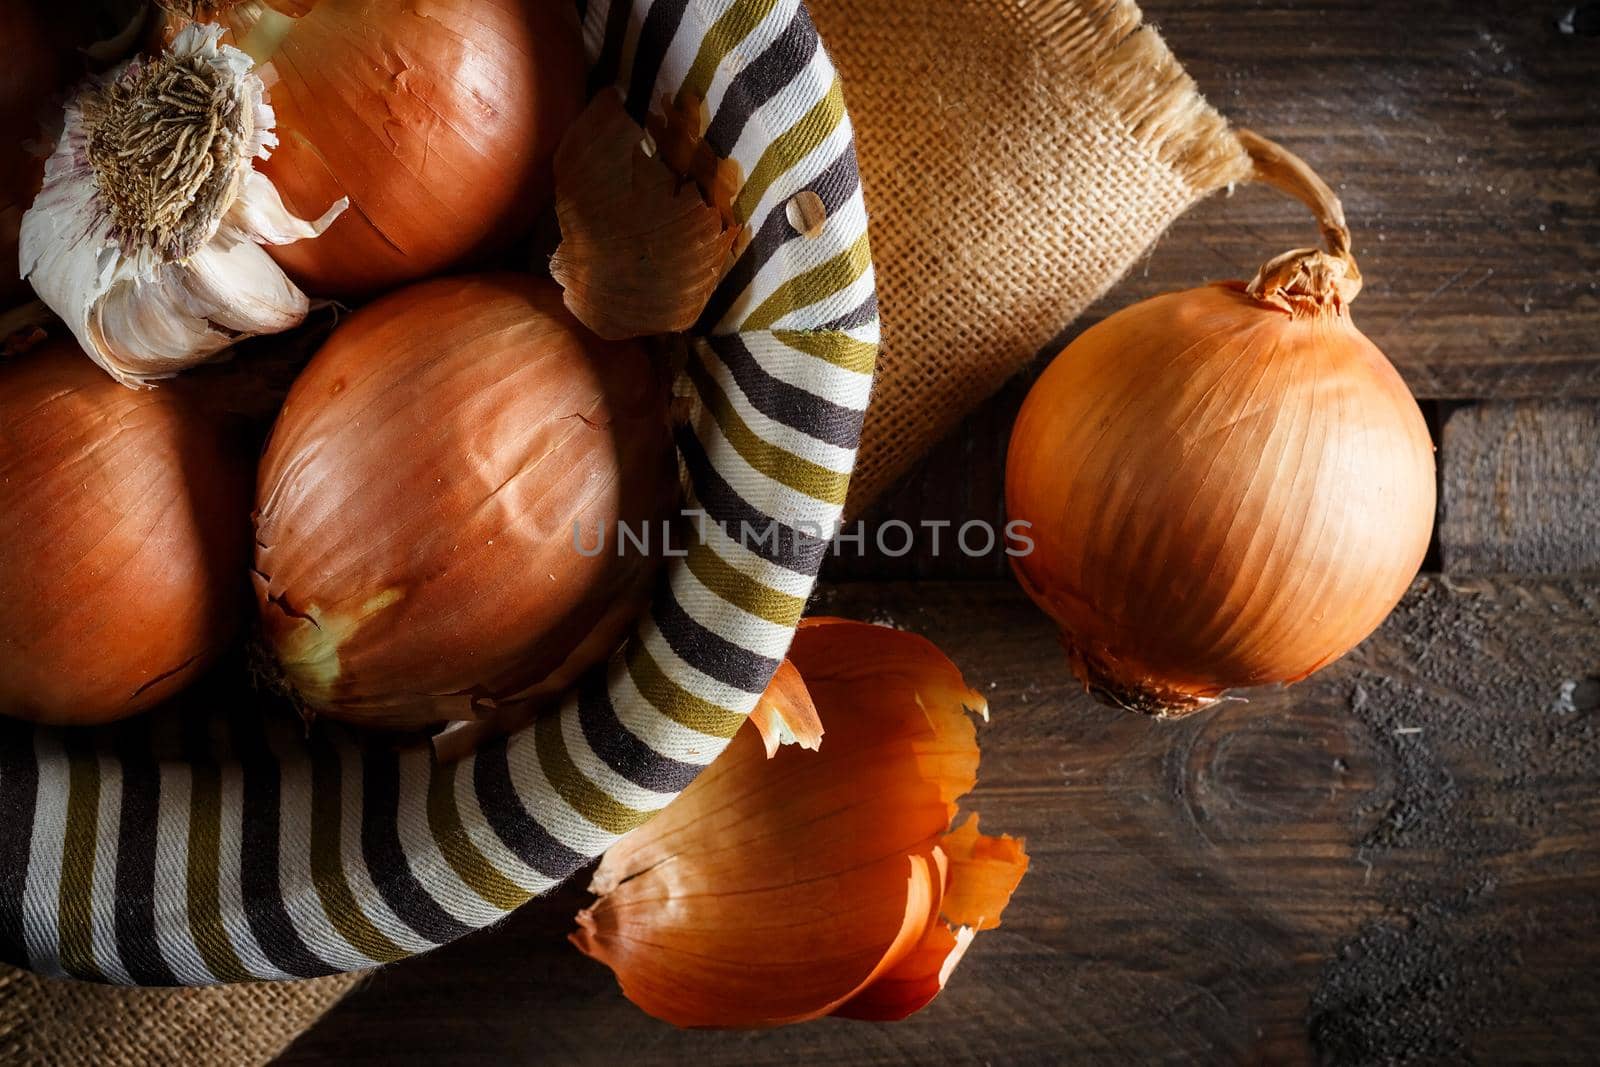 Still life of onions and garlic head in a wicker basket on a sackcloth and wooden boards. Seen from above. Rustic style. Horizontal image.